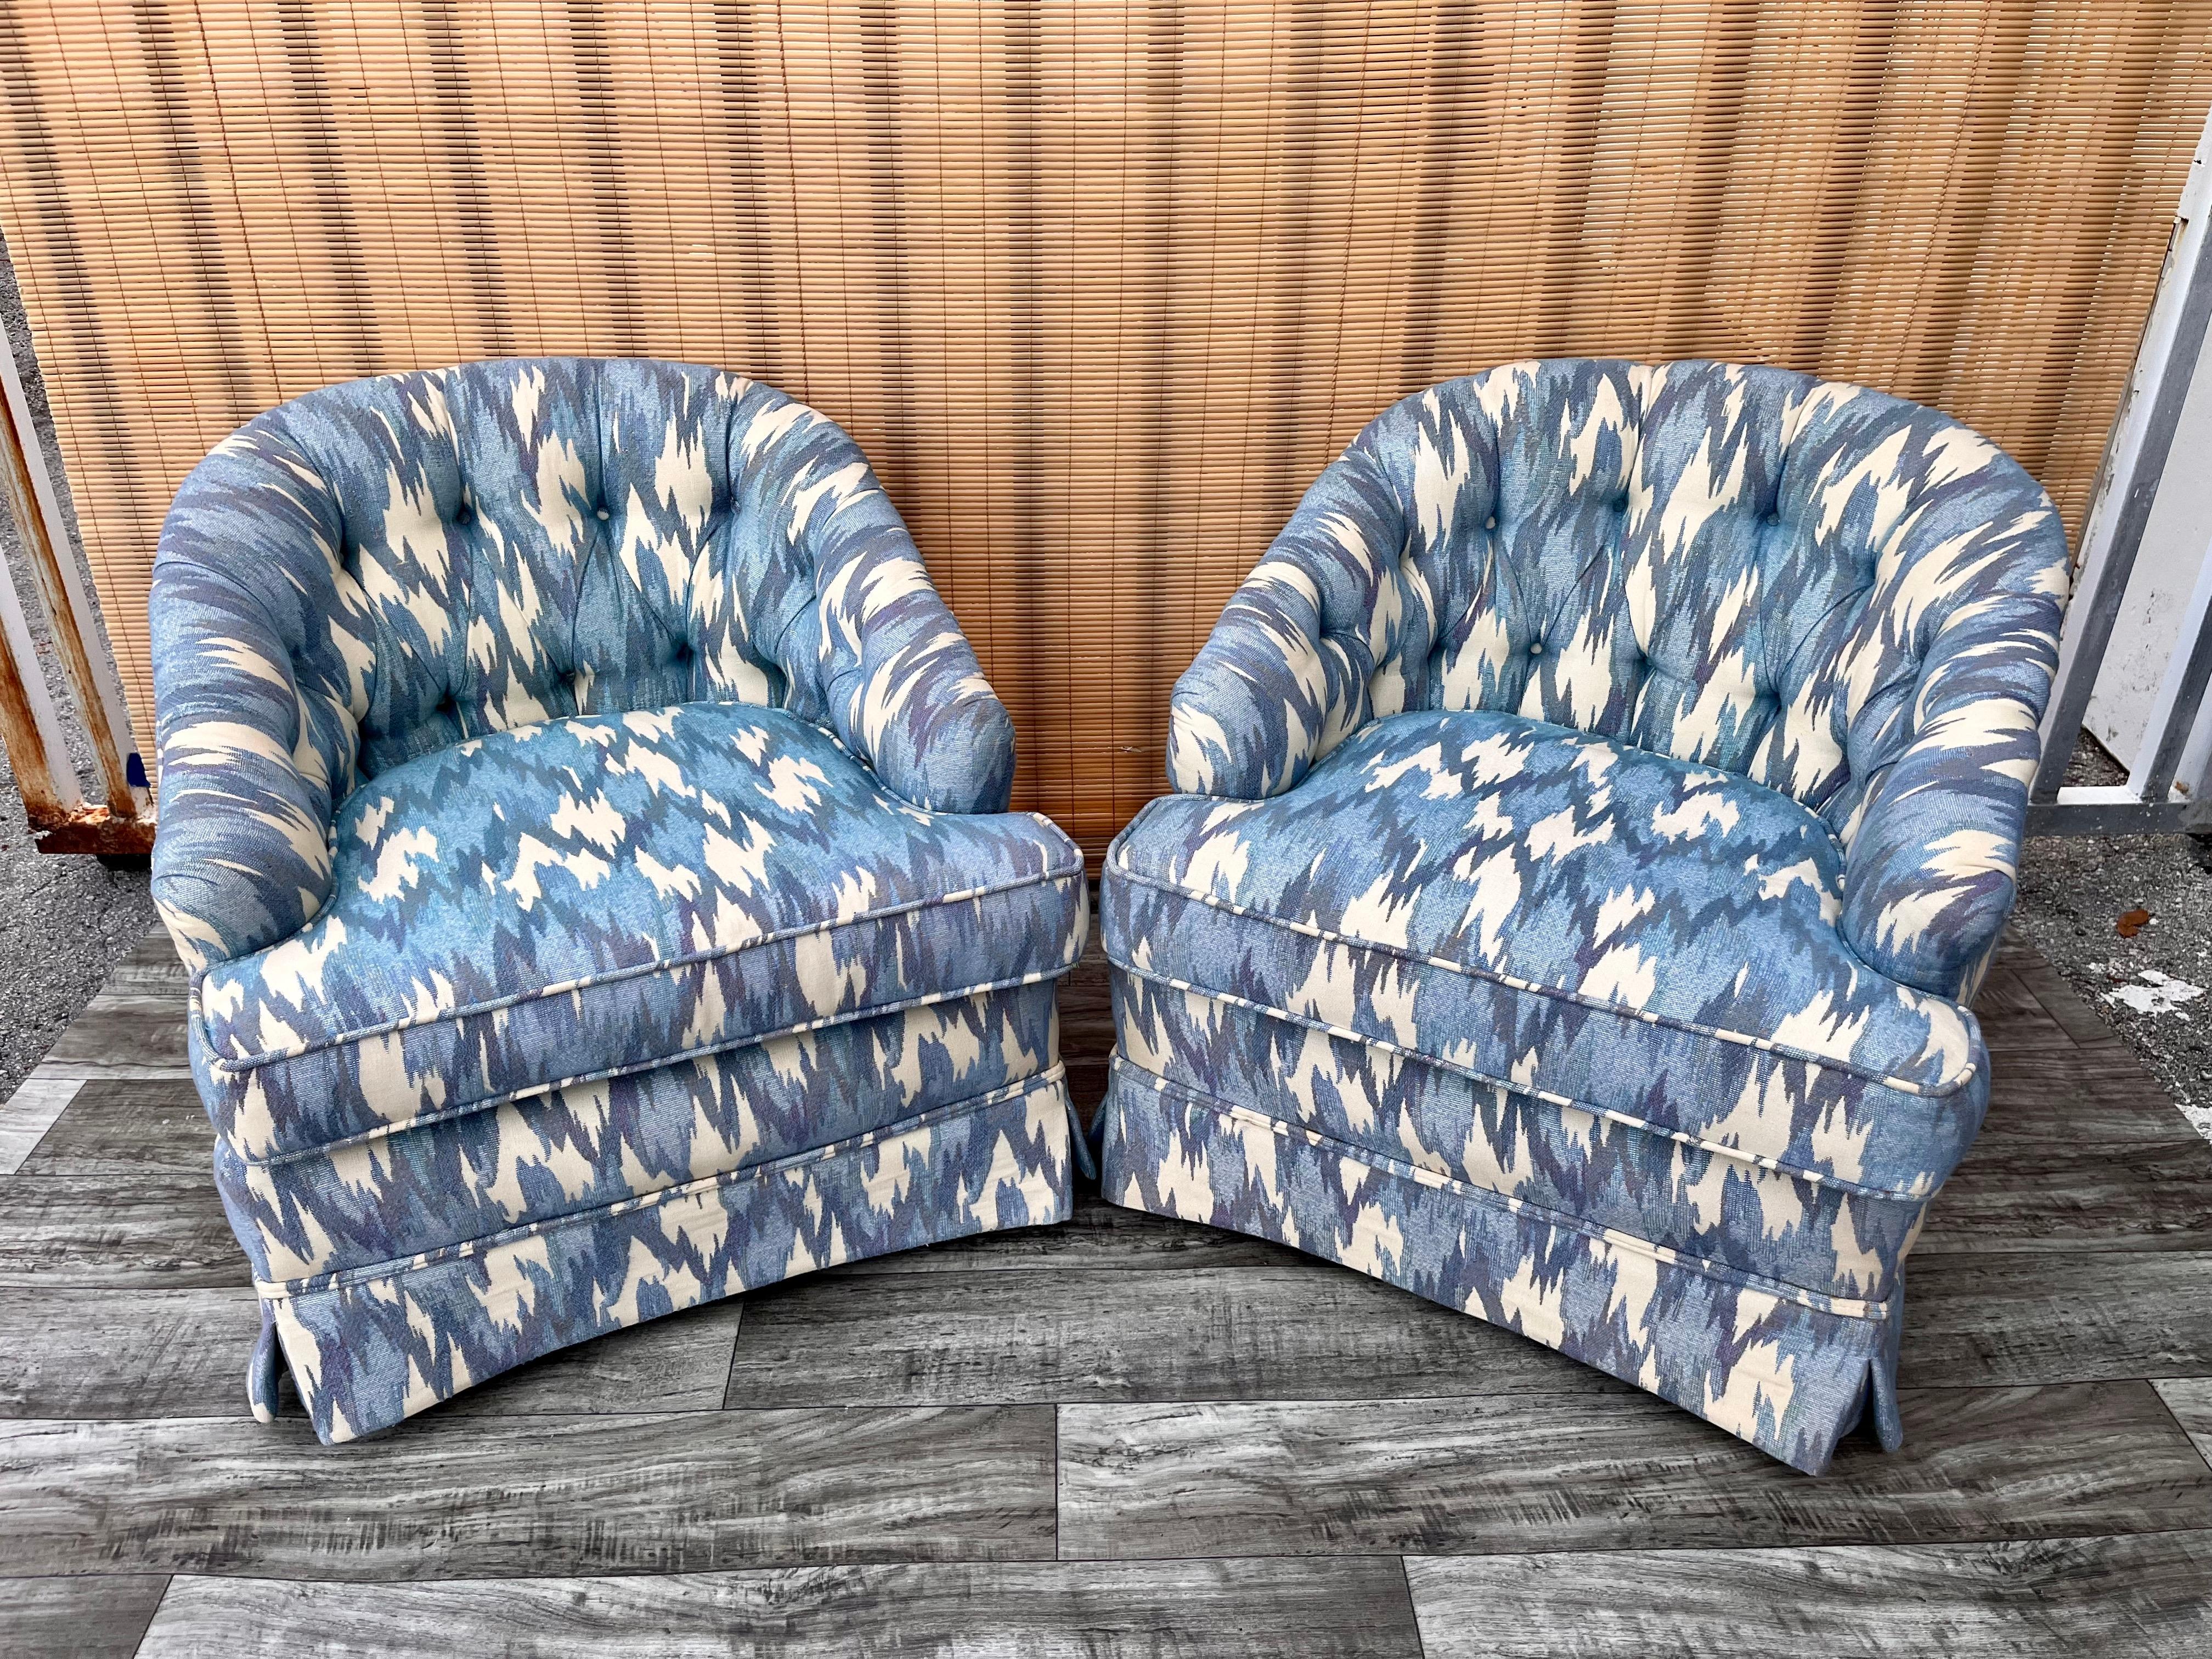 A pair of Vintage Hollywood Regency Upholstered Lounge club chairs with casters. Circa 1960s
Feature solid wood frames, barrel backs, original white and blue tufted upholstery, removable seat cushions, skirted bases, the original label, and two